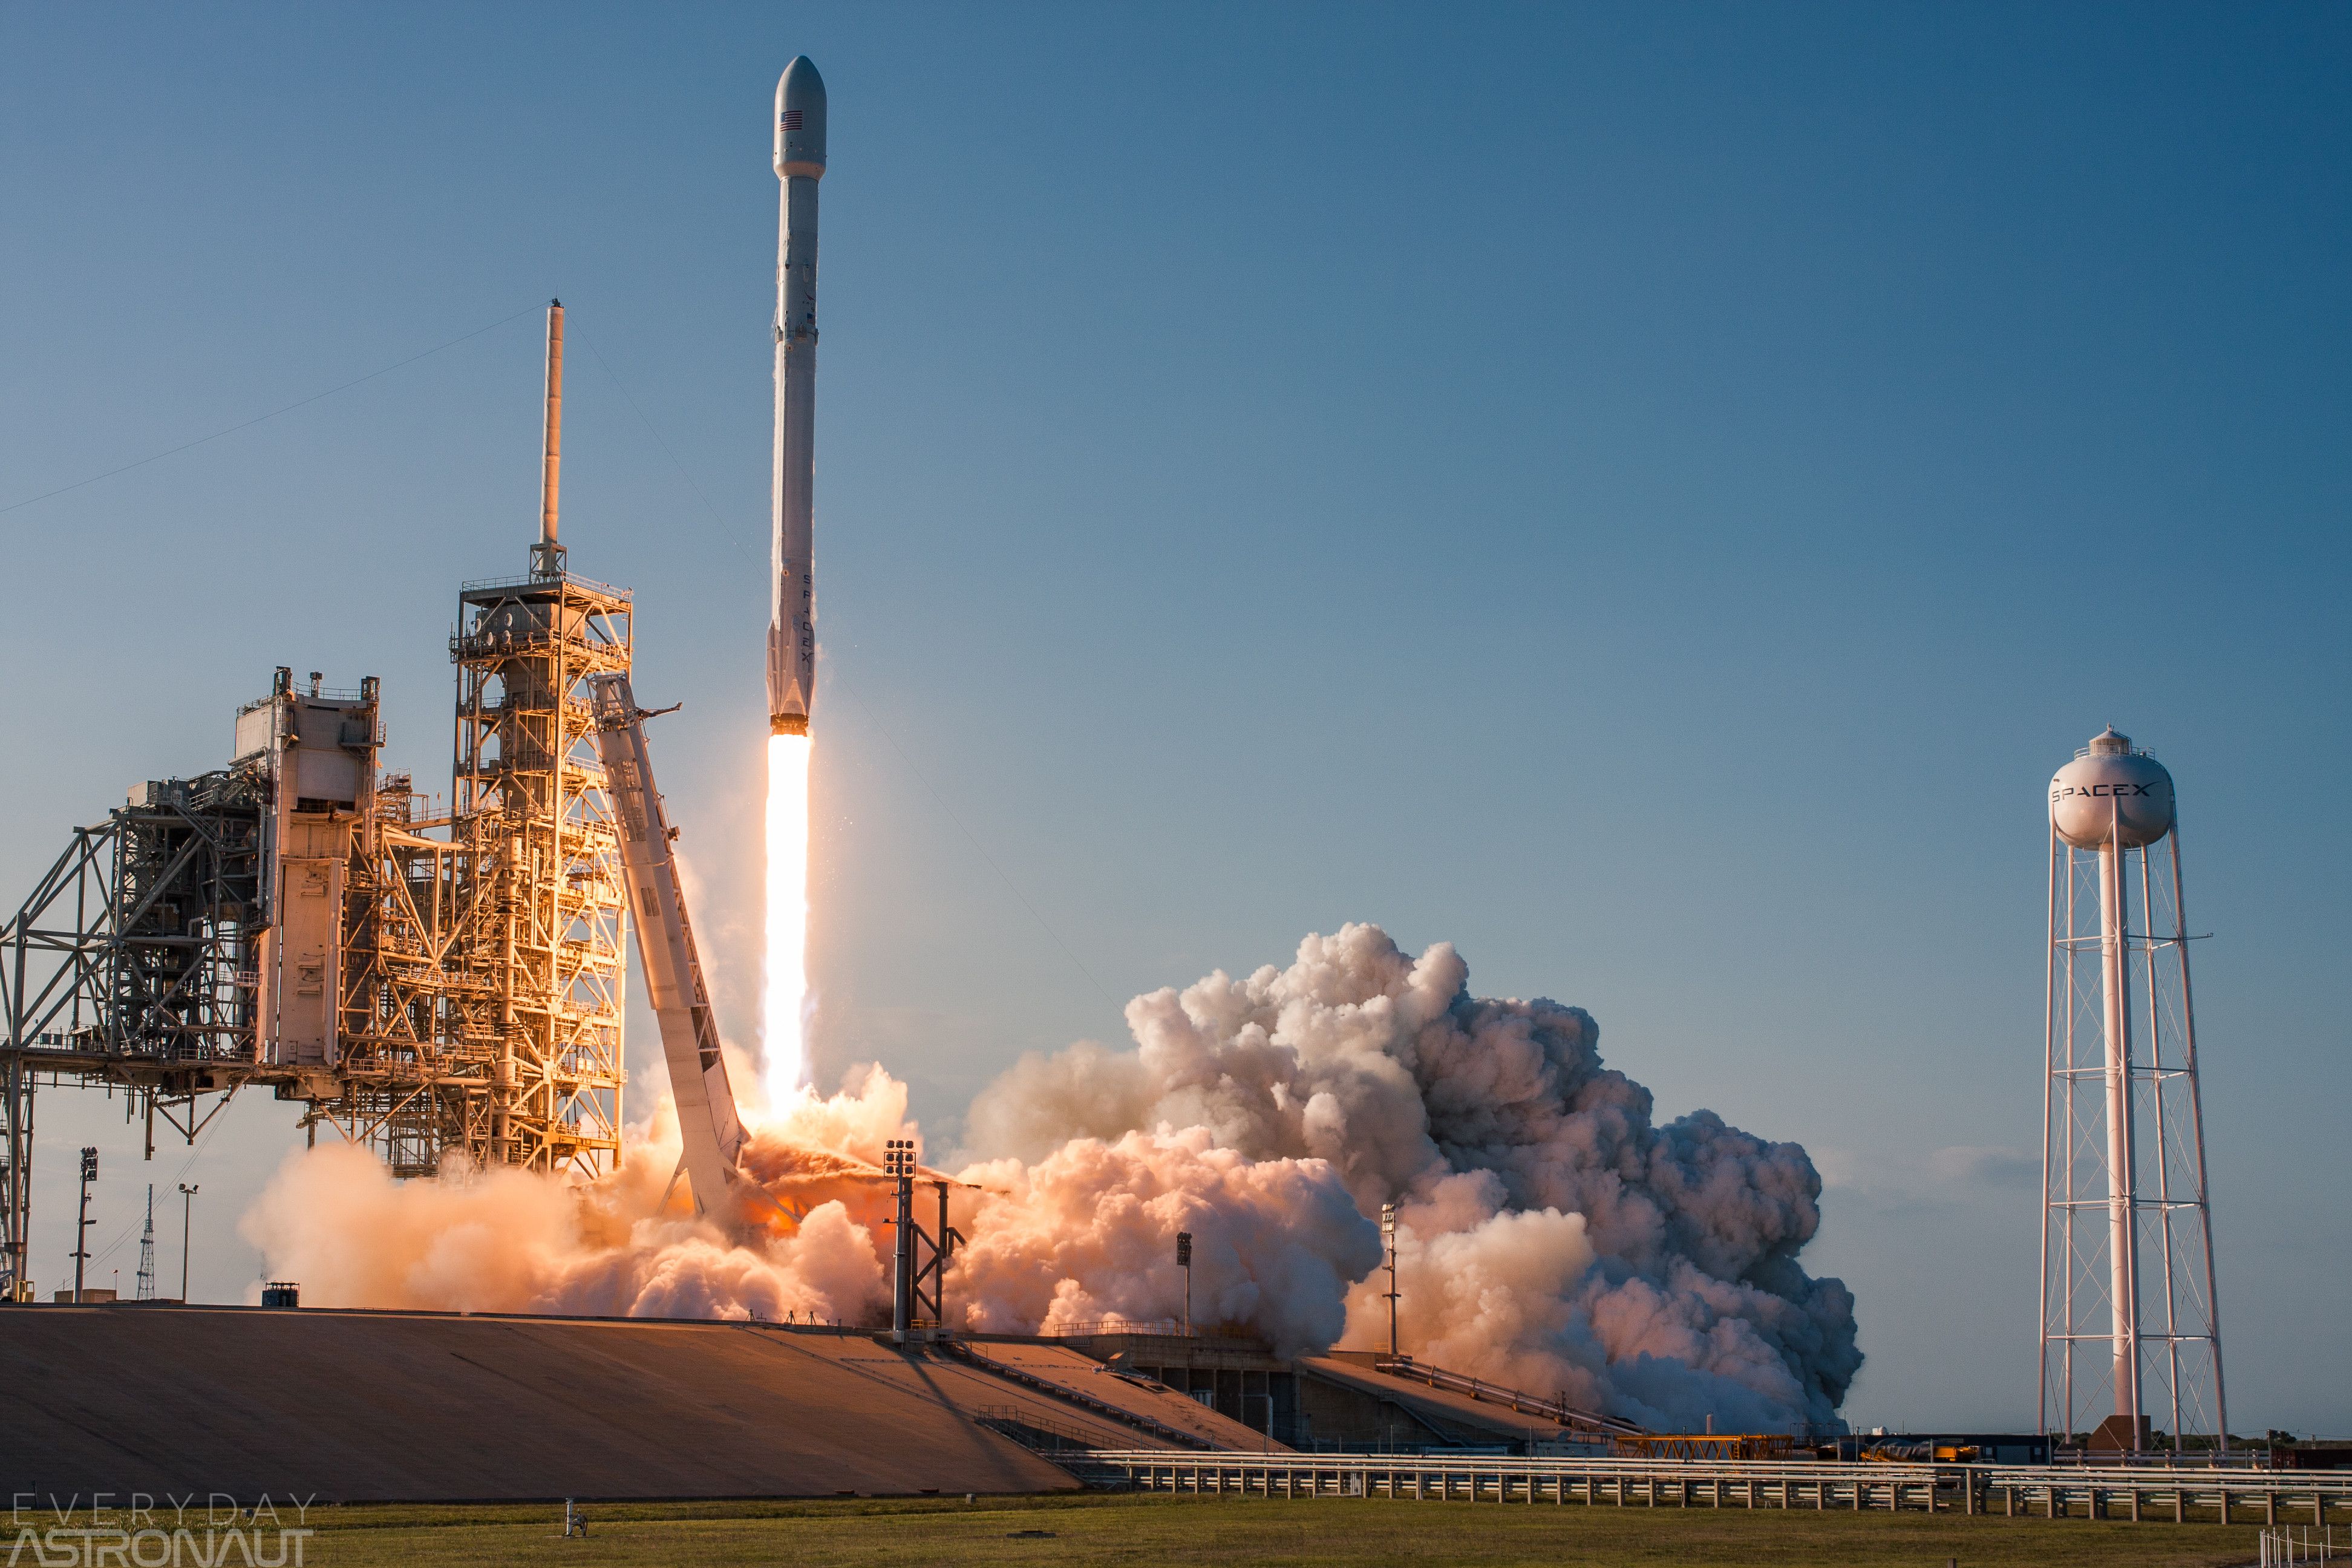 Thrilling launch at SpaceX Rocket Background Witness history in the making